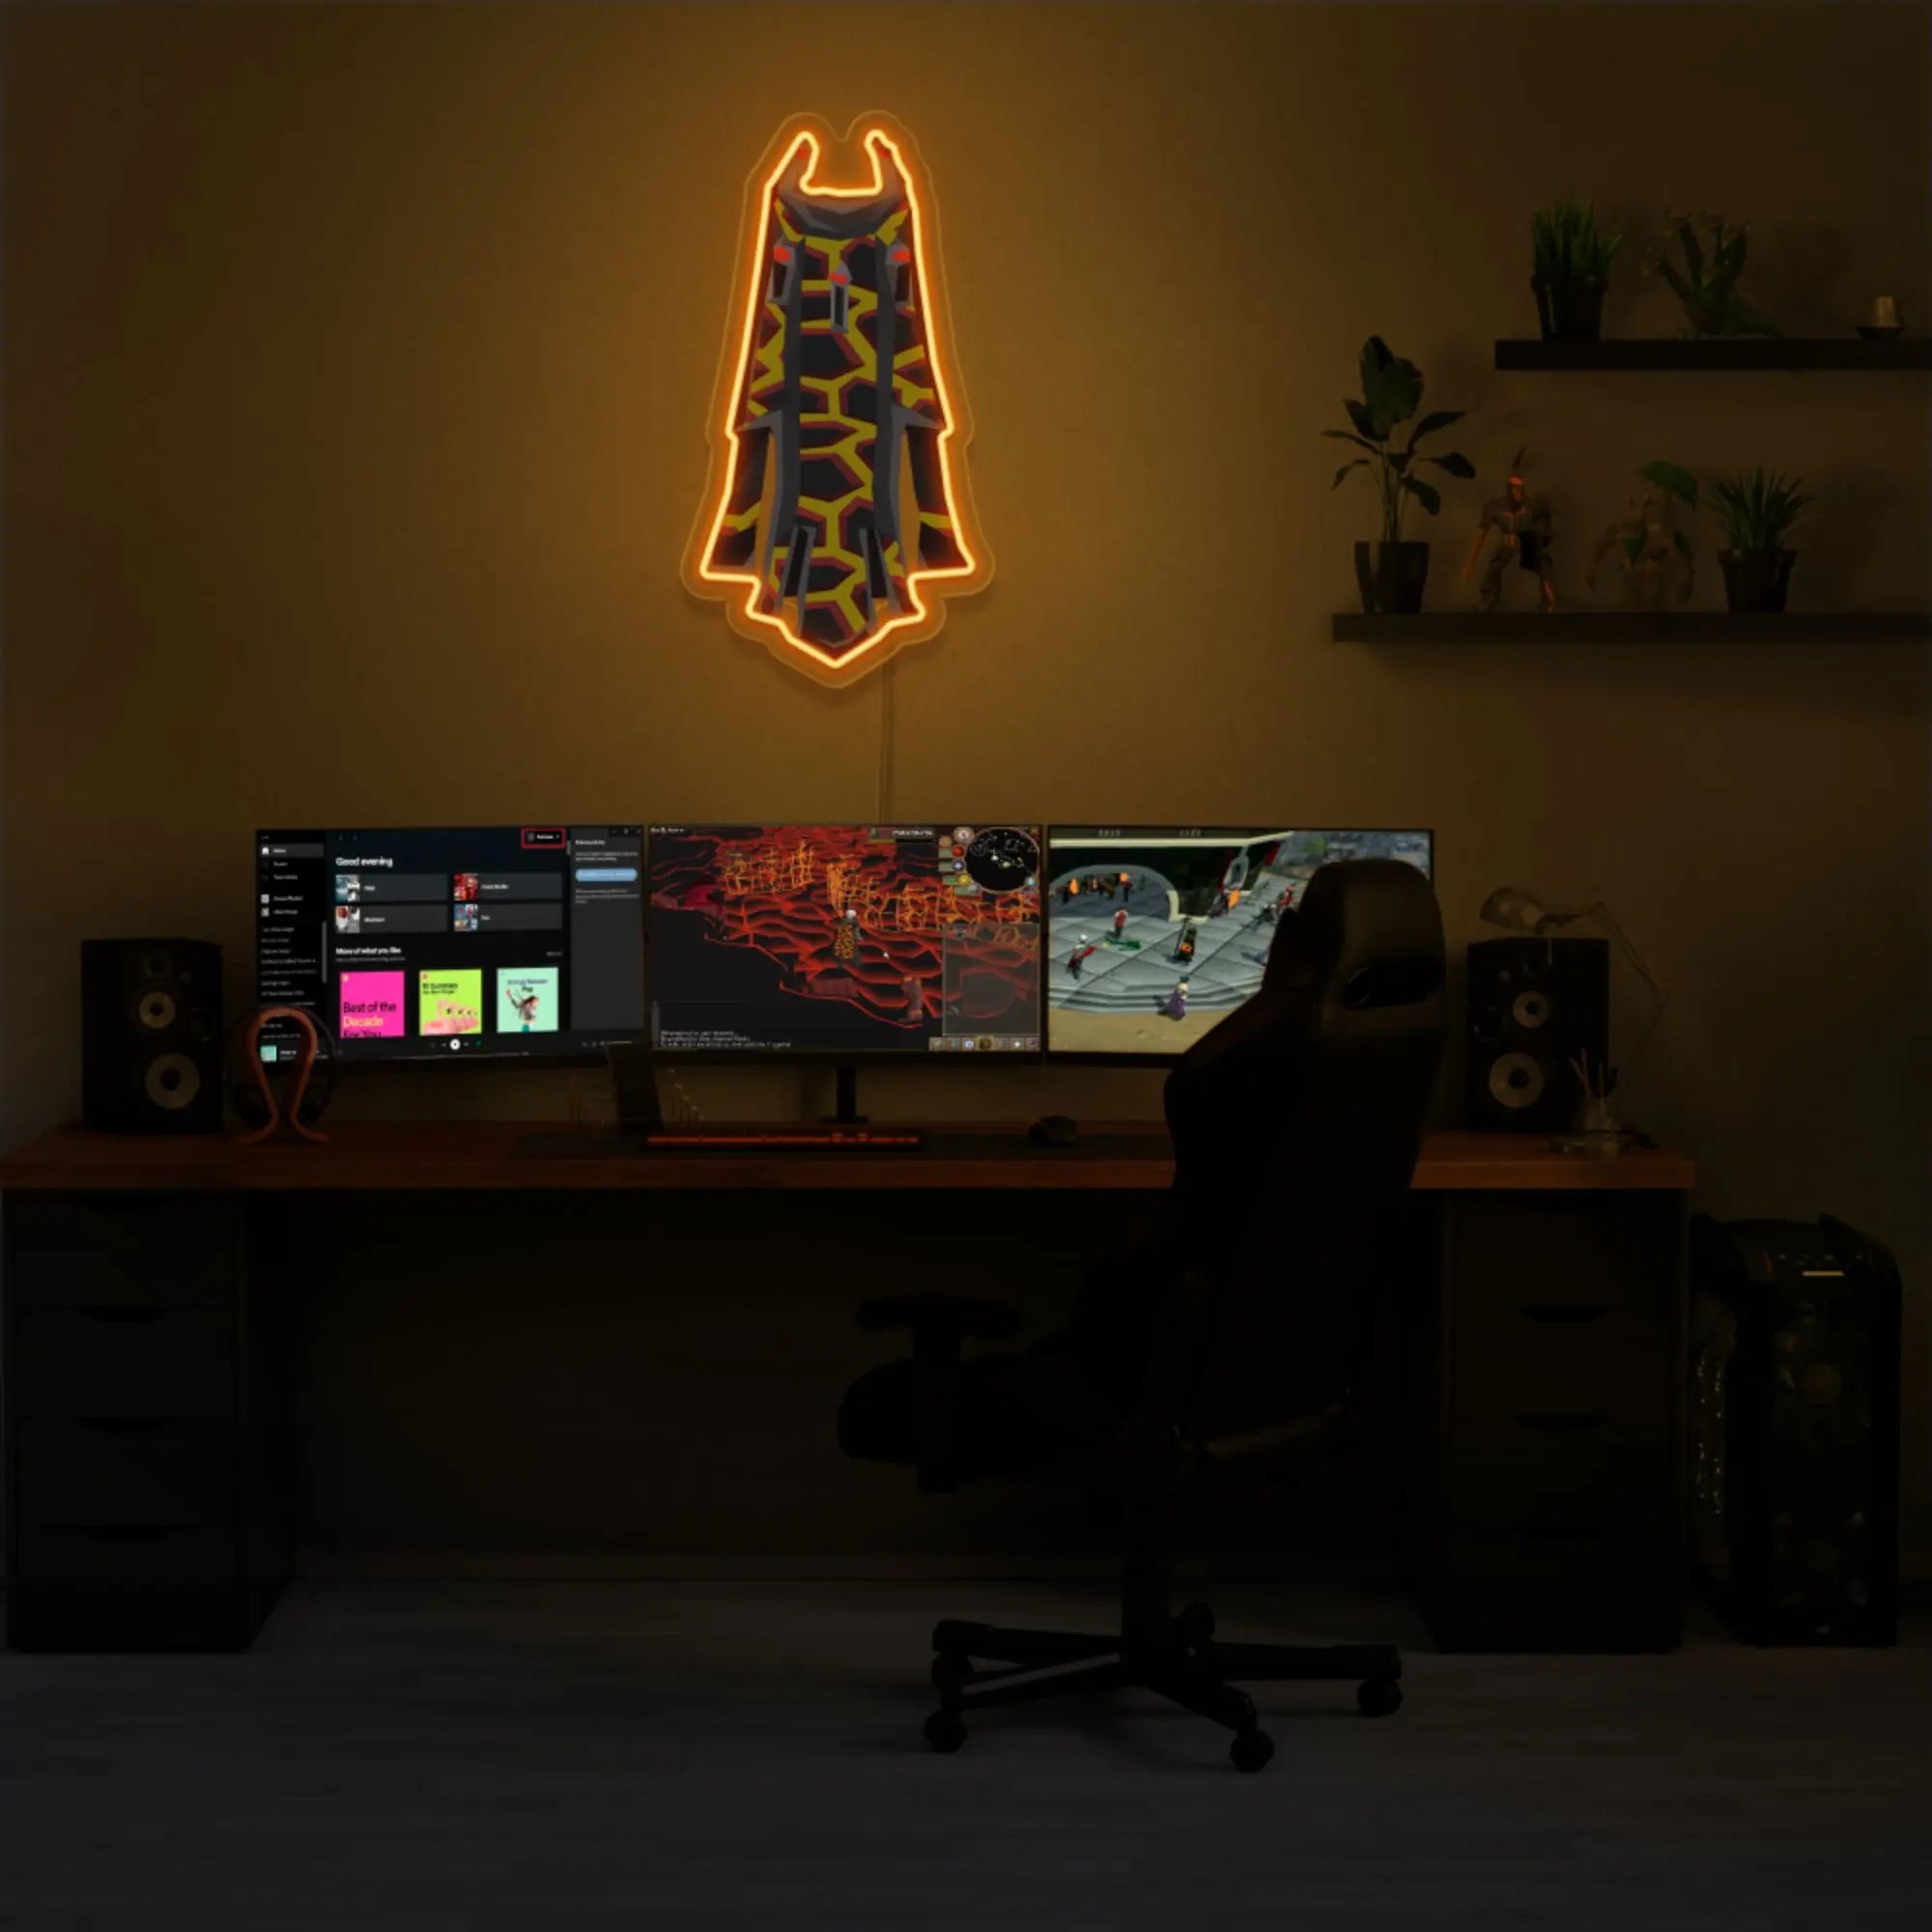 Illuminate your gaming setup with the Runescape Infernal Max Cape LED neon sign mounted above a gaming PC. The iconic Infernal Max Cape symbolizes mastery and dedication in Old School RuneScape. A perfect gift for RS enthusiasts.